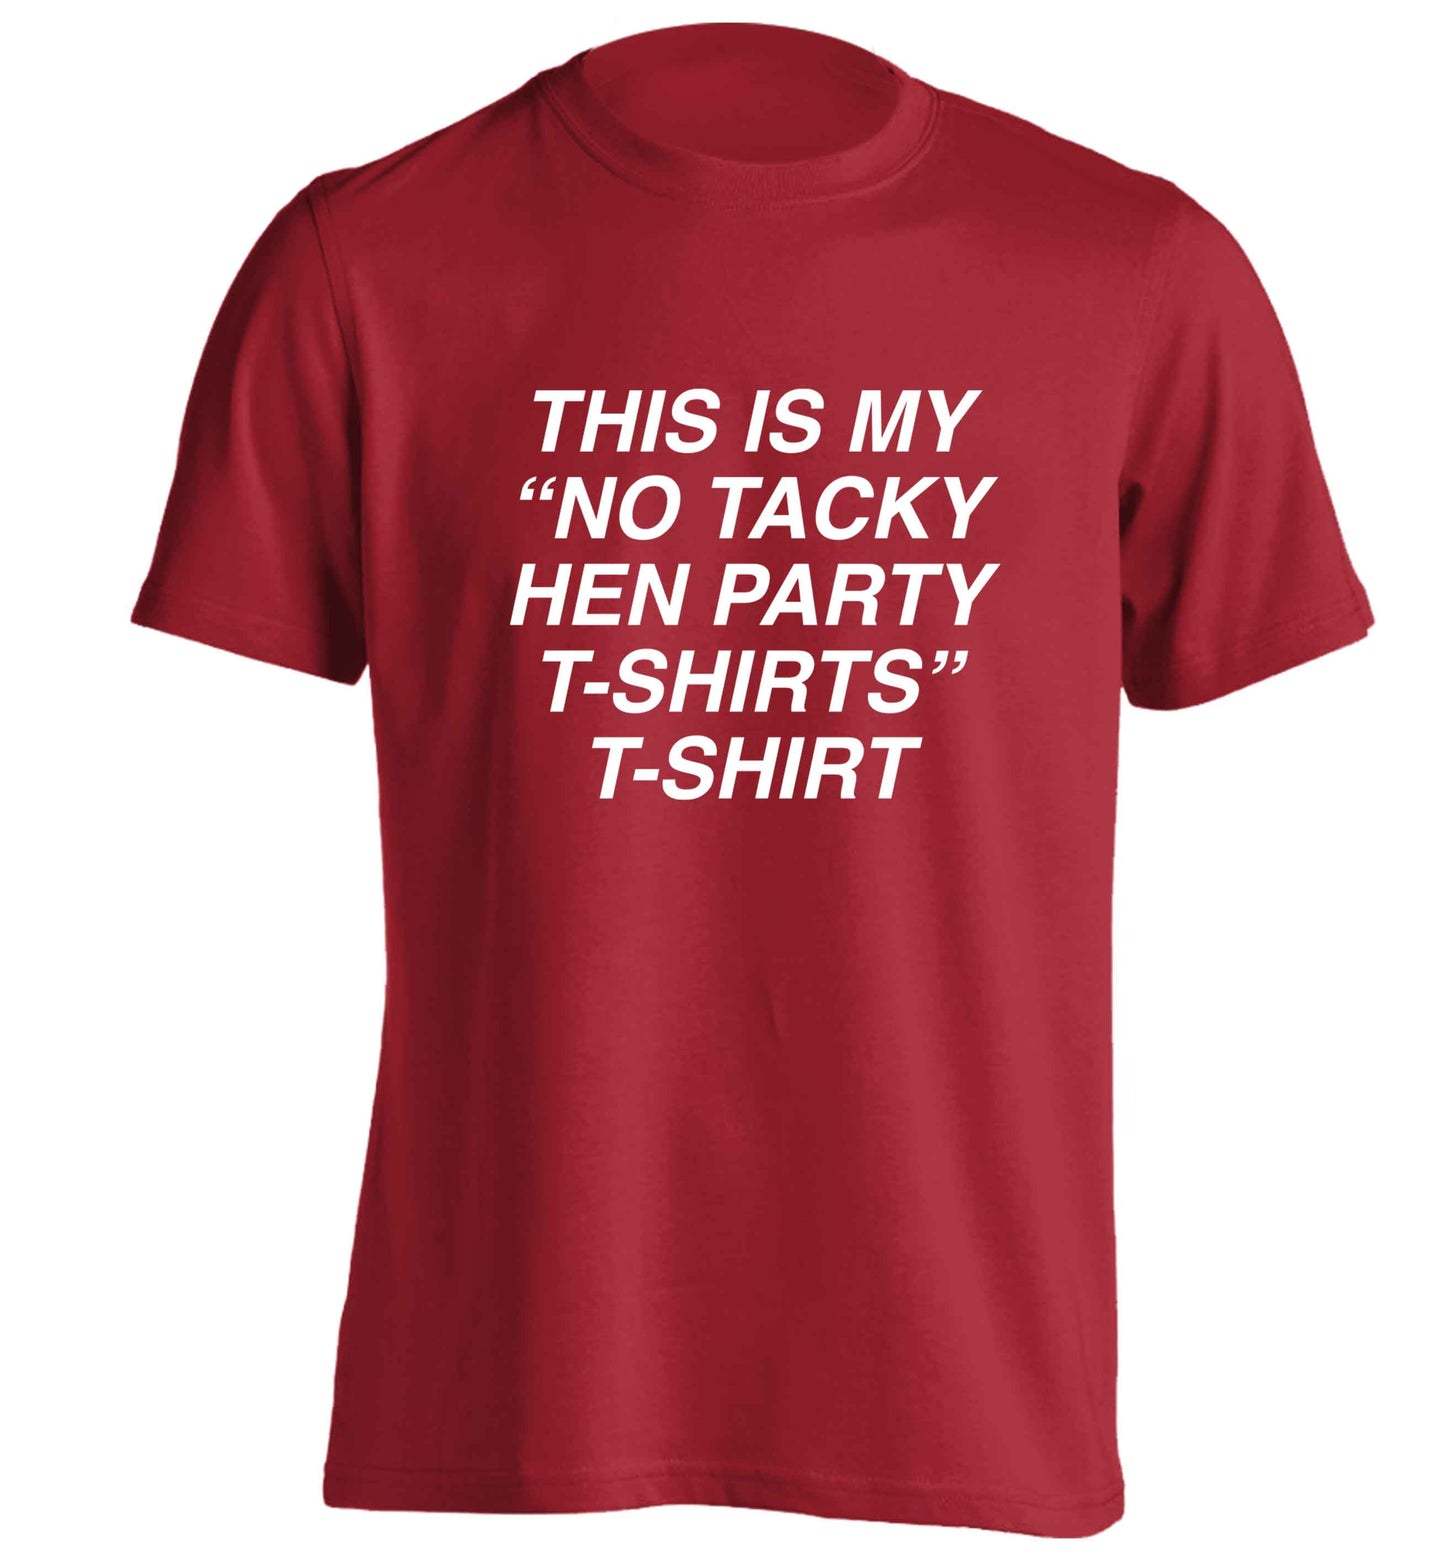 This is my 'no tacky hen party T-Shirt'  adults unisex red Tshirt 2XL